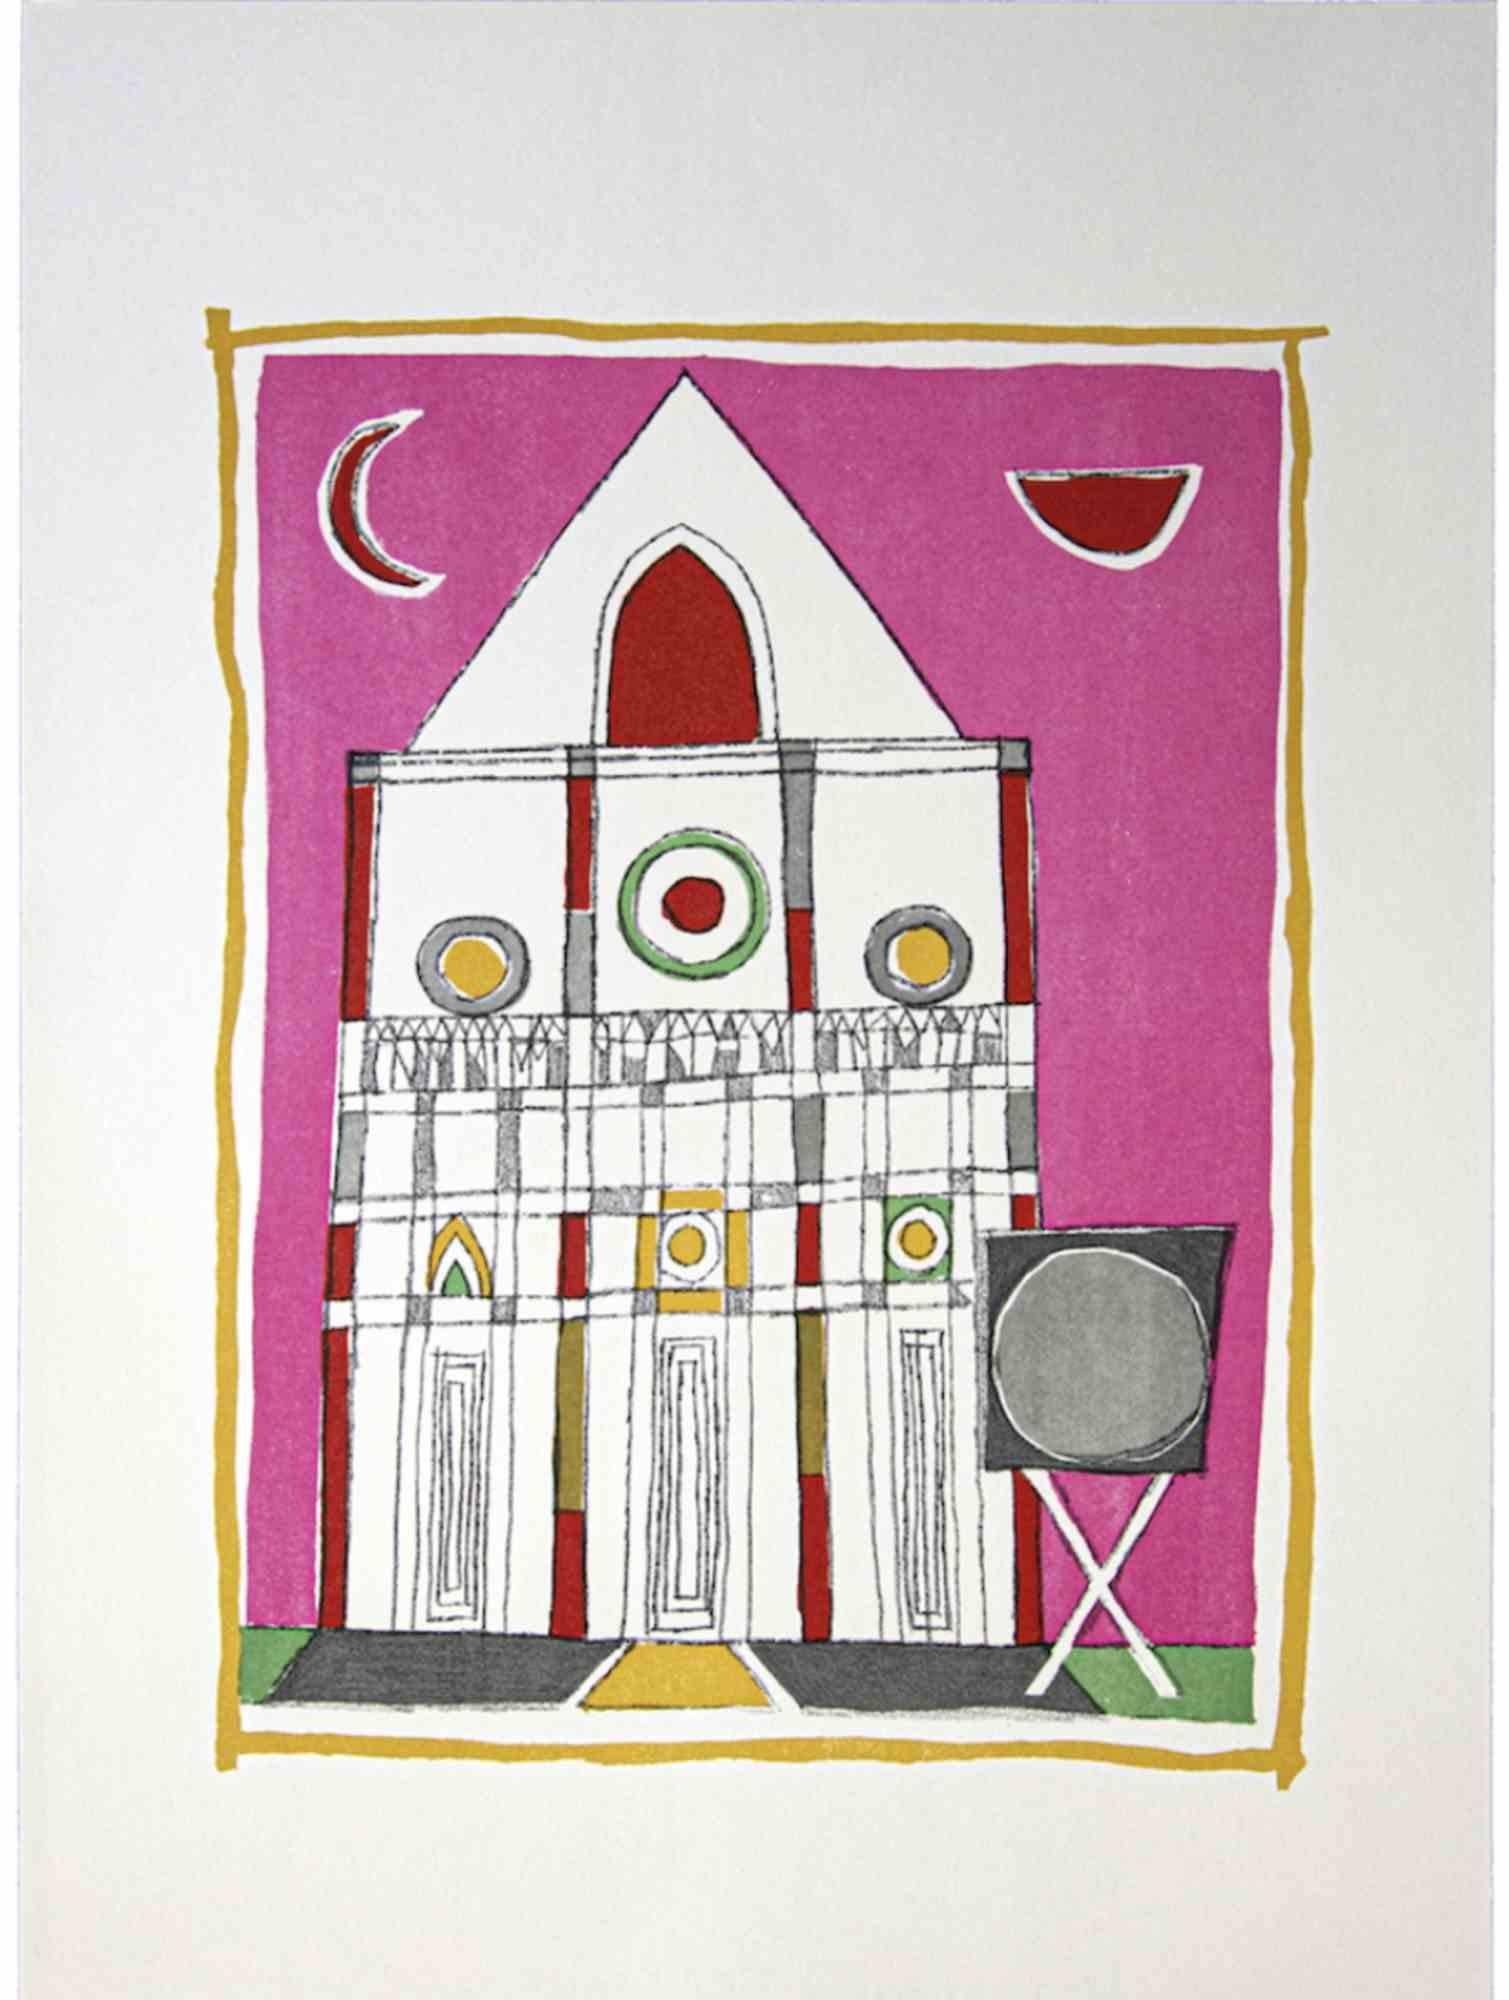 The Cathedral is a Vintage Offset Print on ivory-colored paper, realized by  Franco Gentilini ( Italian Painter, 1909-1981), in the 1970s.

The state of preservation of the artwork is excellent.

Franco Gentilini ( Italian Painter, 1909-1981):